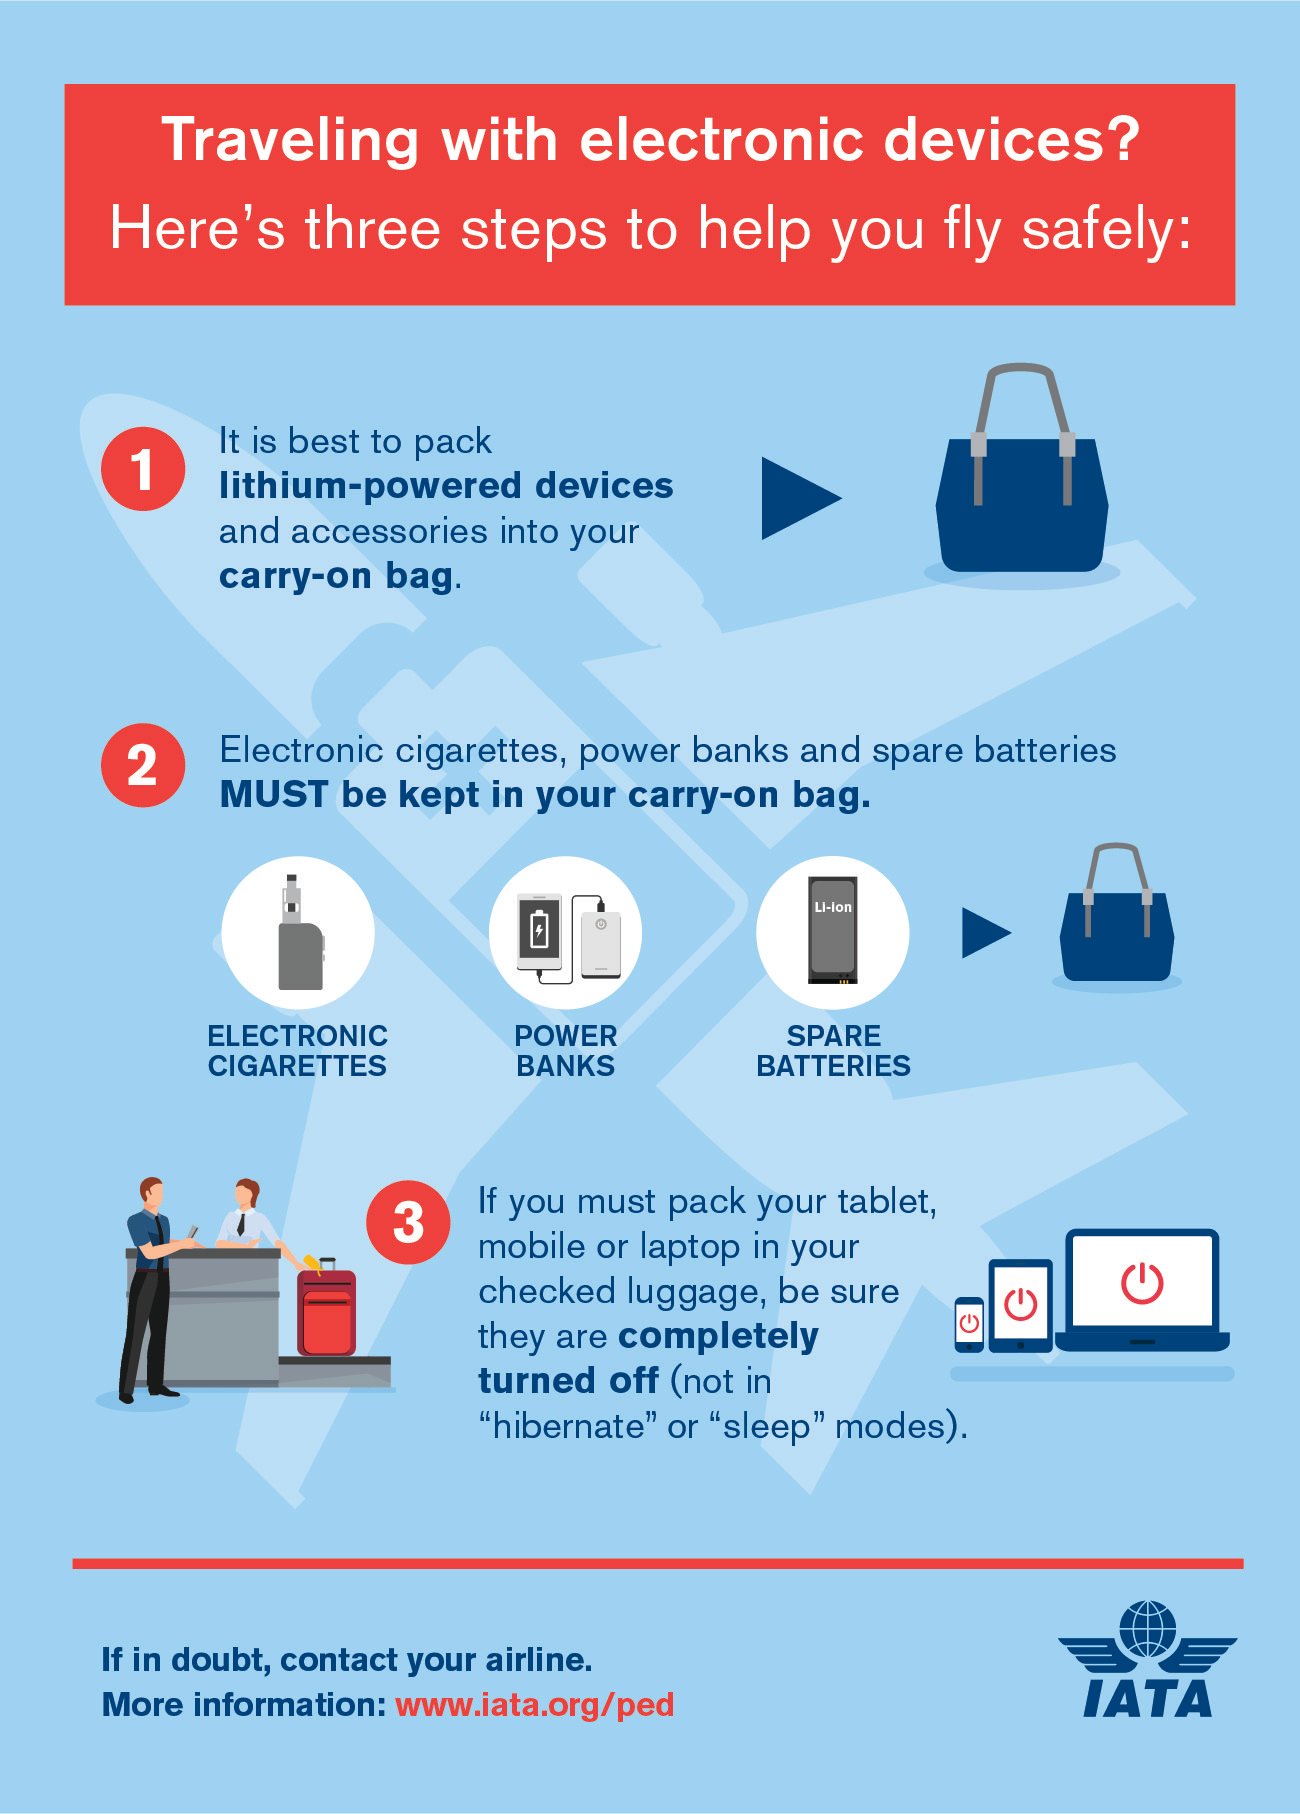 Can I put electronic devices in checked luggage?